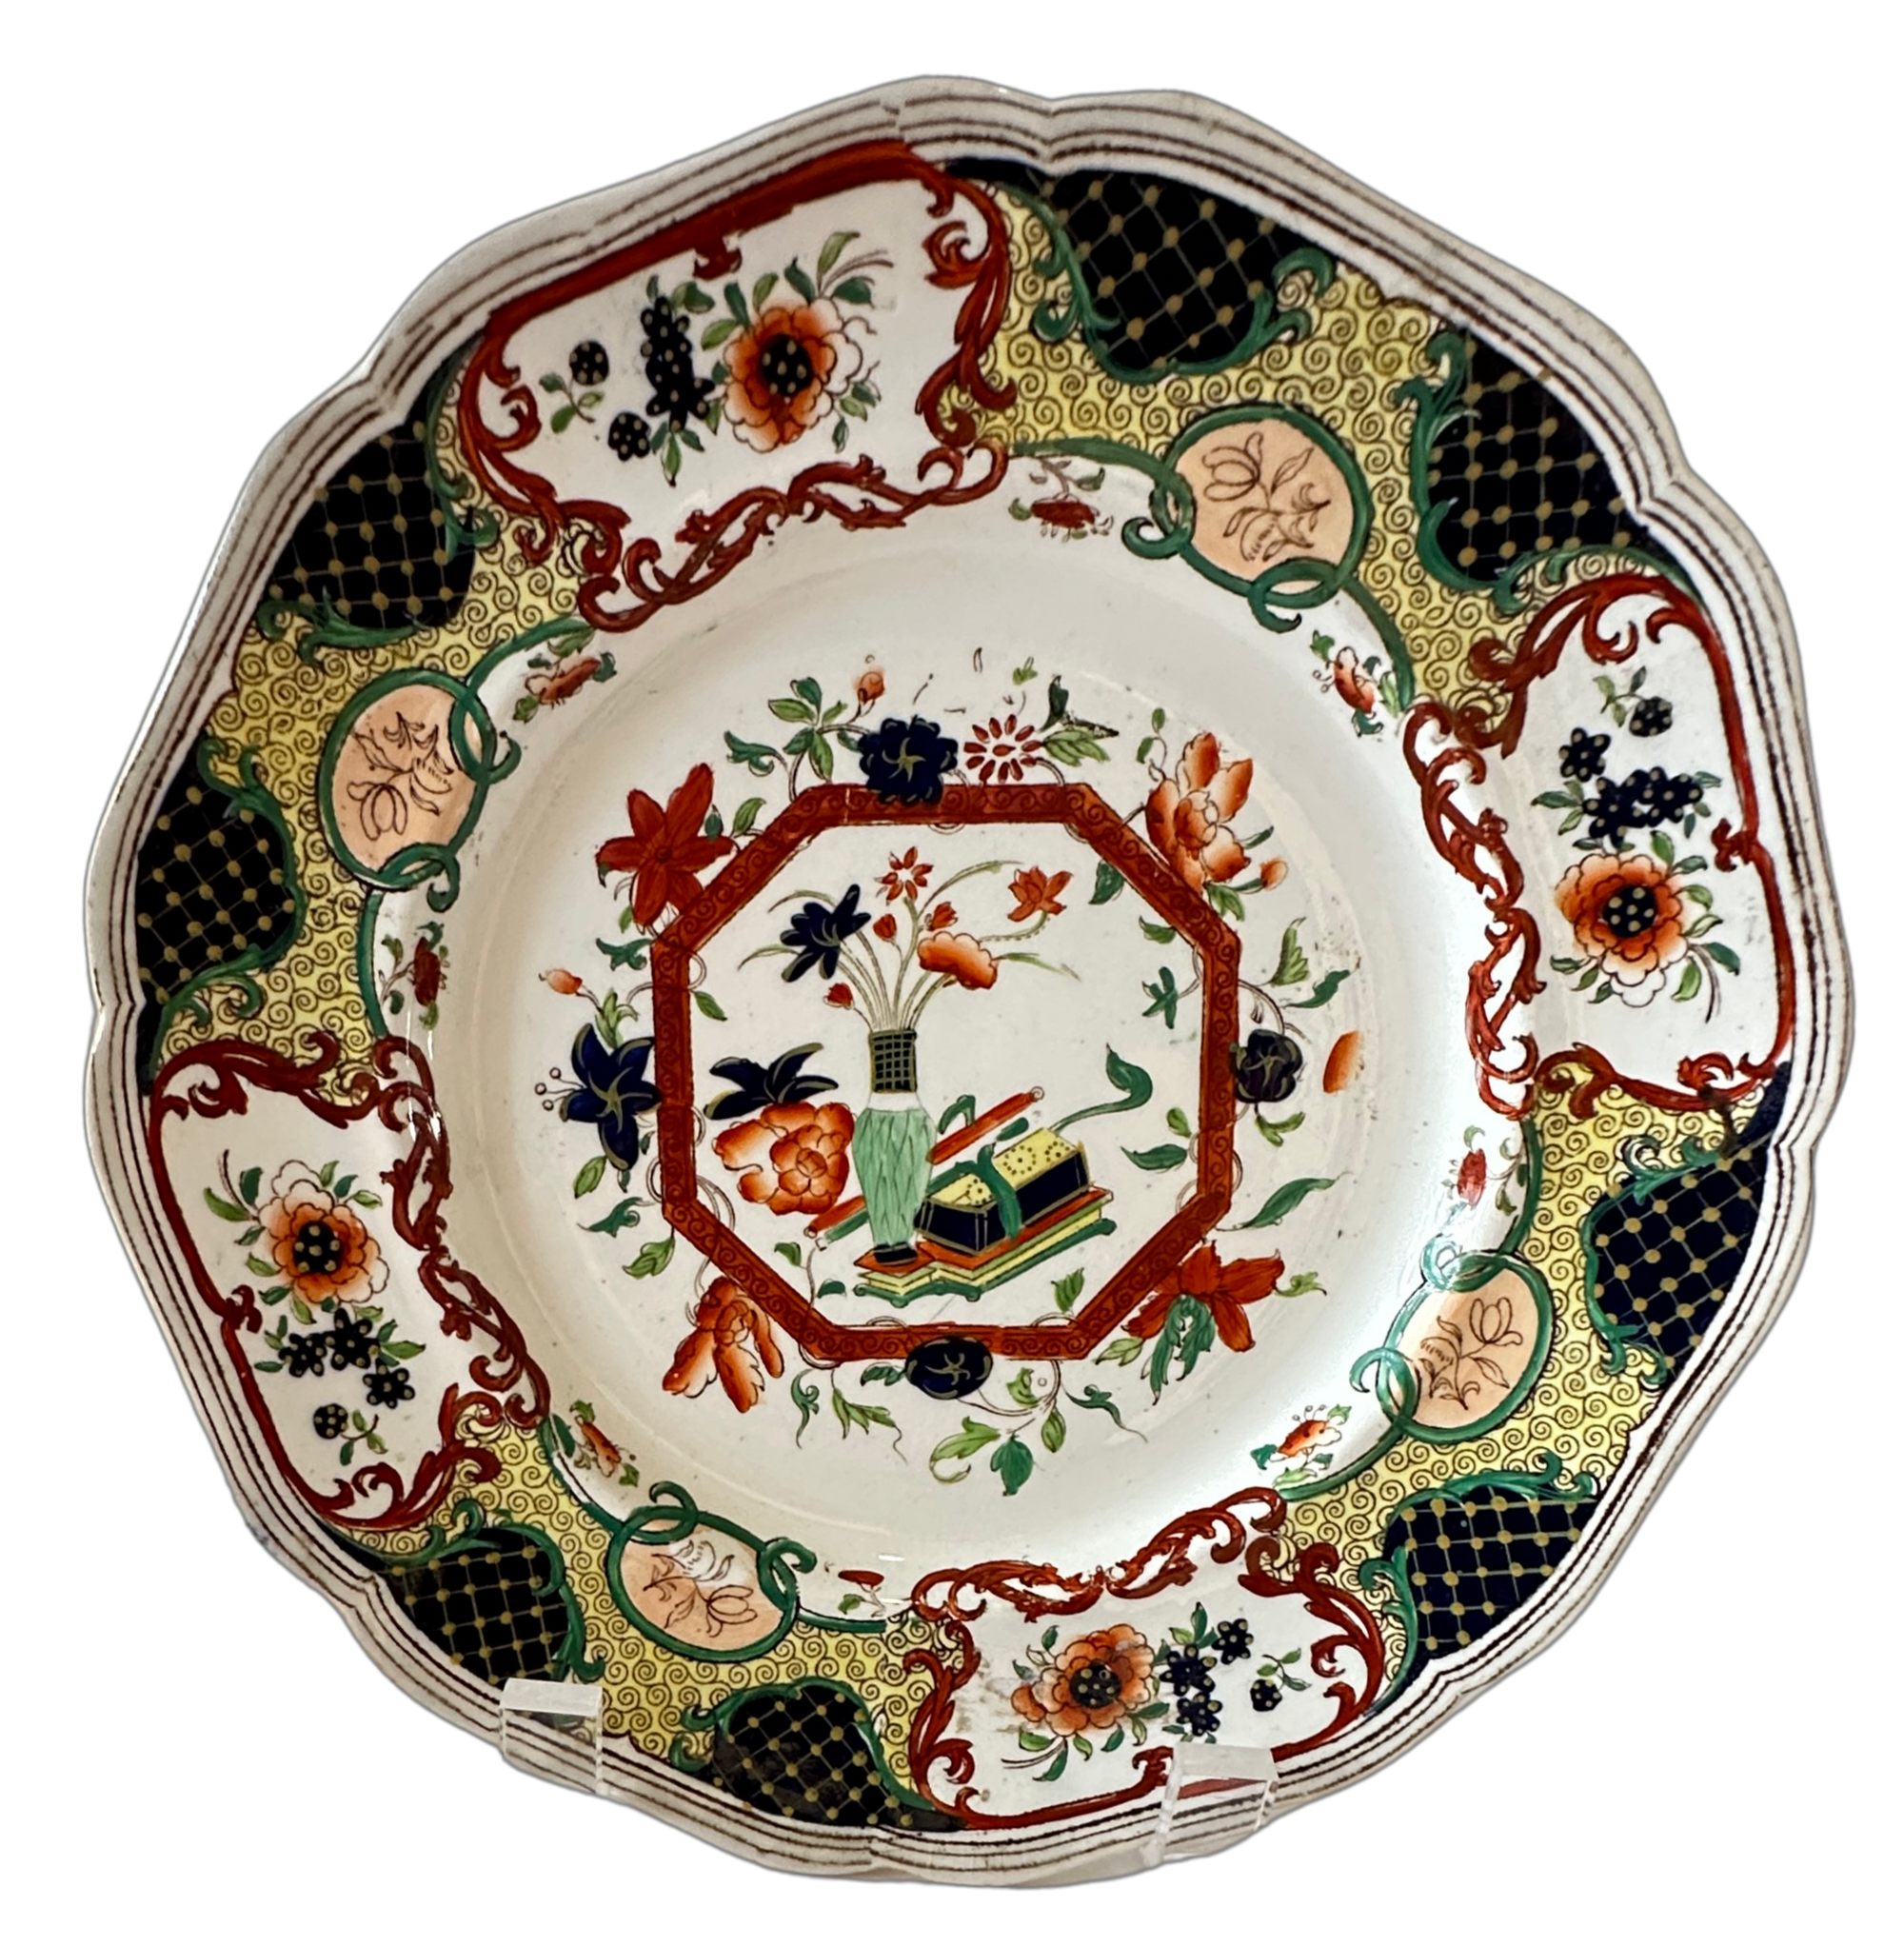 Antique Polychrome Plate - Hunt and Bloom